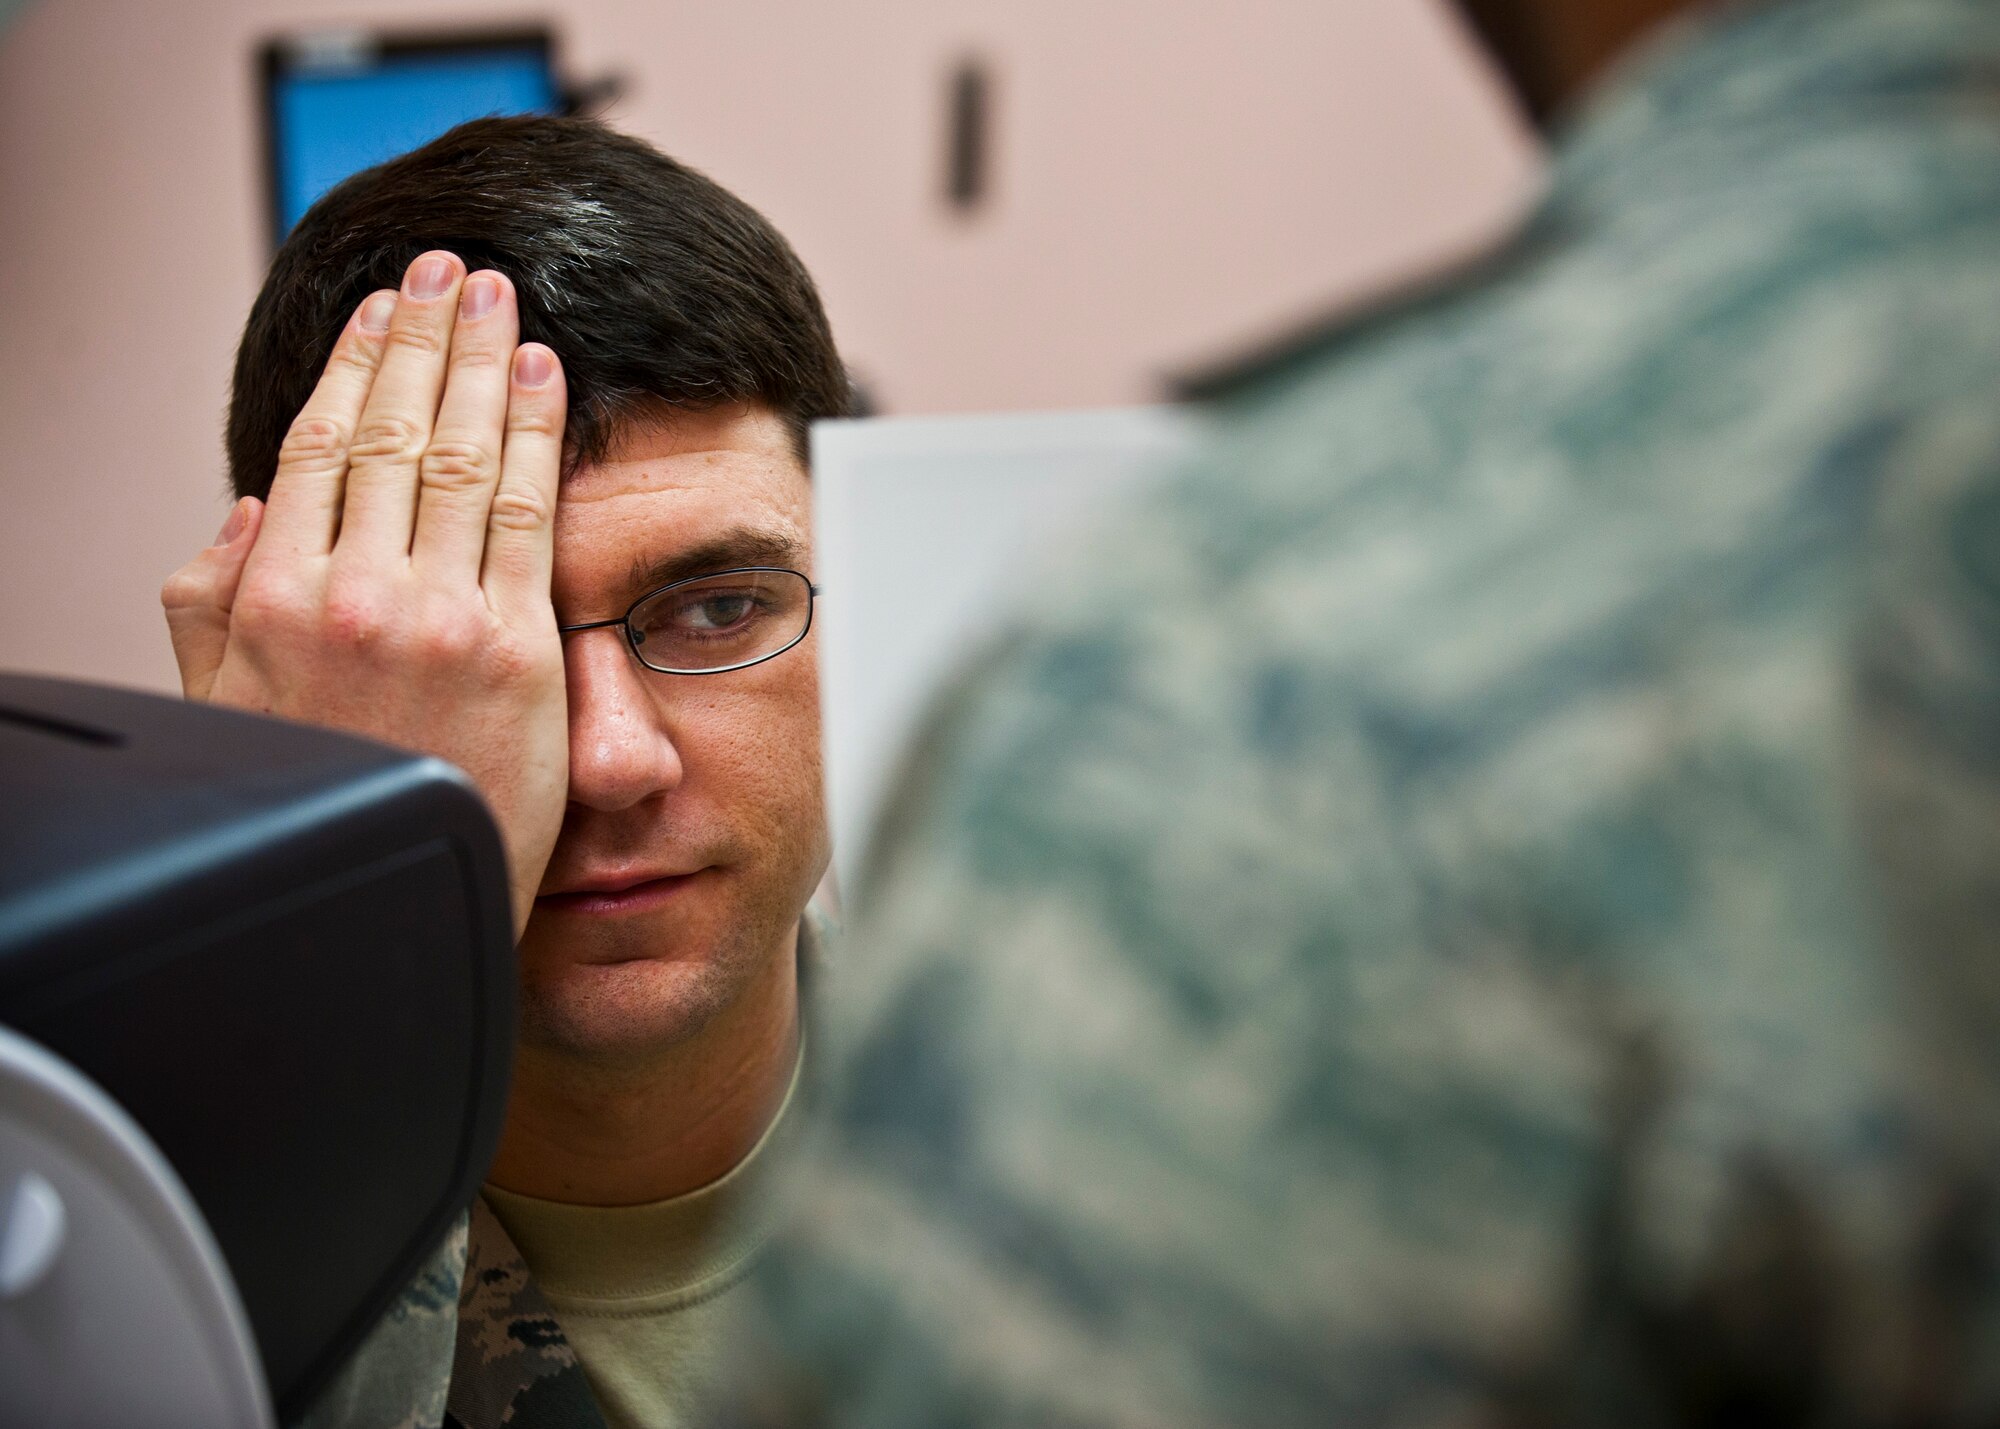 U.S. Air Force Staff Sgt. Shane Lahaie, 820th REDHORSE power production journeyman, receives an eye exam during an occupational health exam Jan. 10, 2014, at Nellis Air Force Base, Nev. An eye exam assesses vision and ability to focus on and discern objects. (U.S. Air Force photo/Senior Airman Brett Clashman)